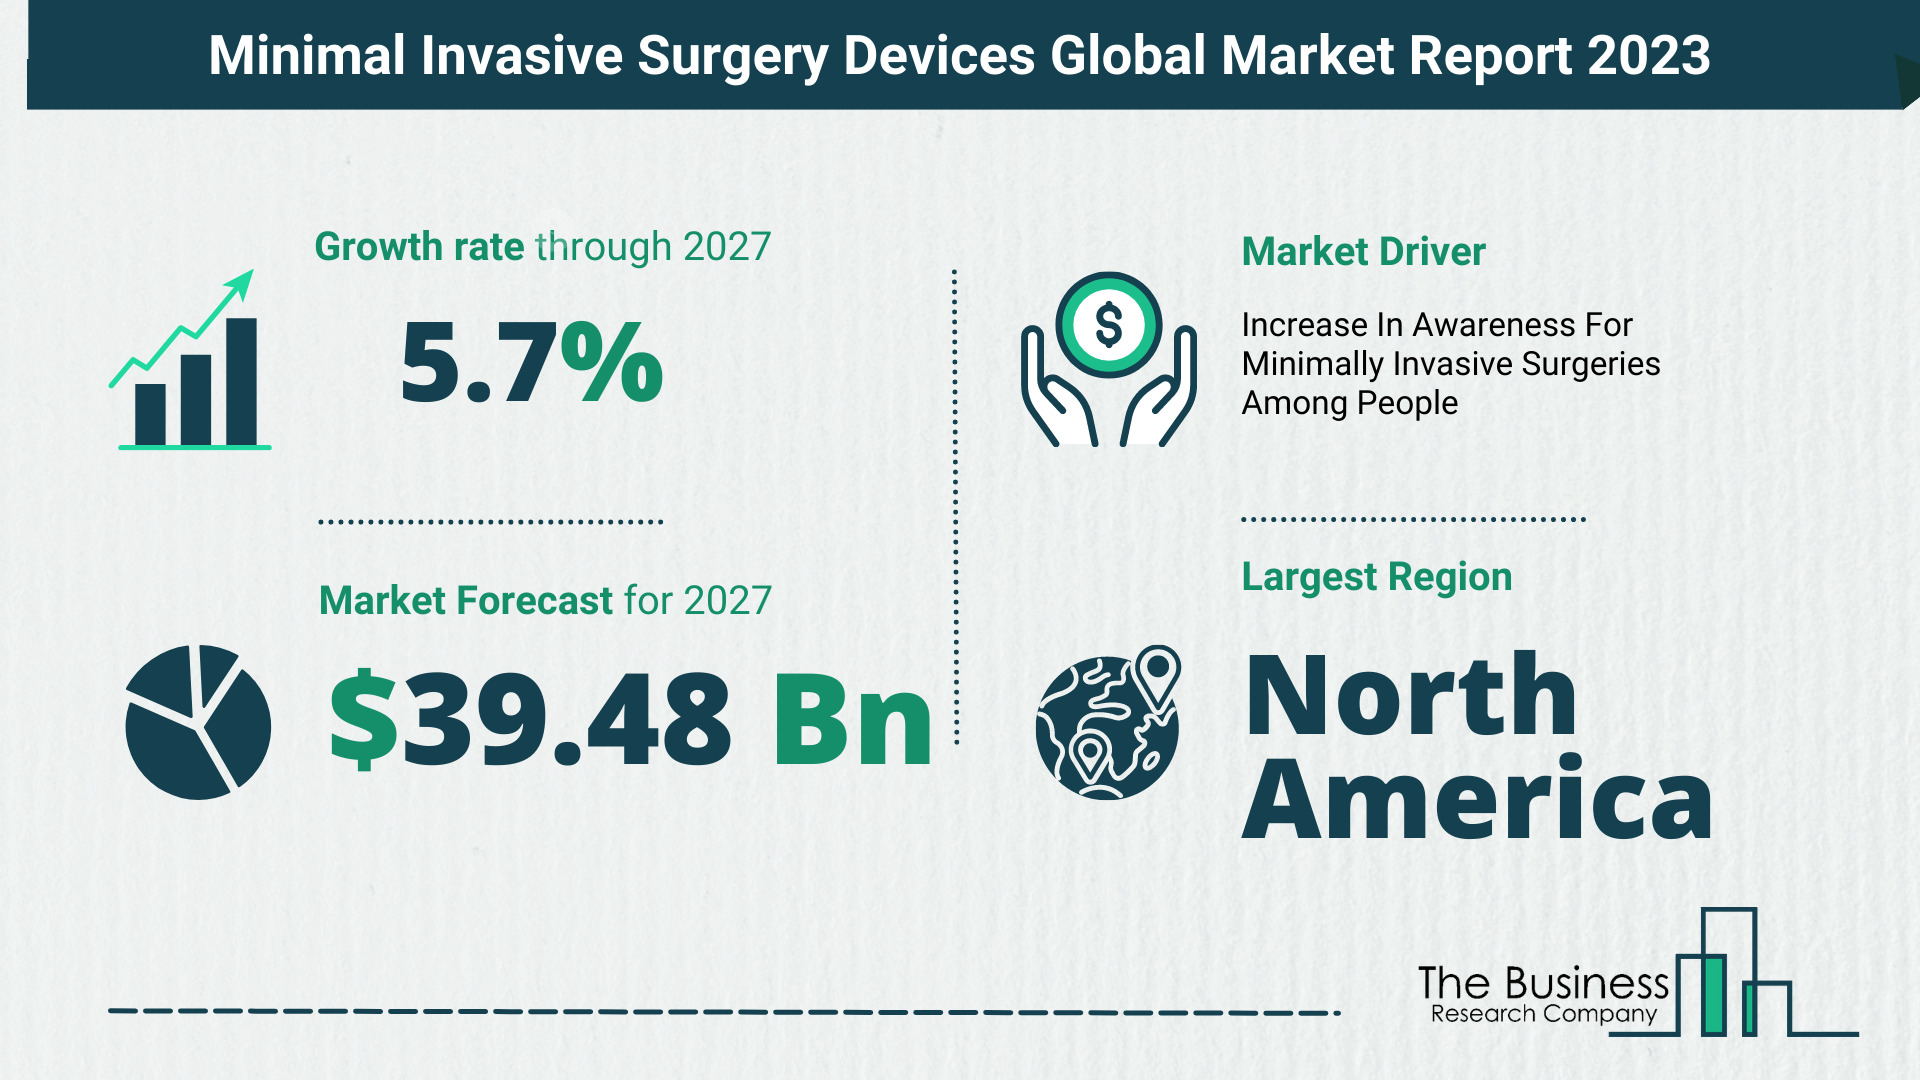 How Will The Minimal Invasive Surgery Devices Market Size Grow In The Coming Years?